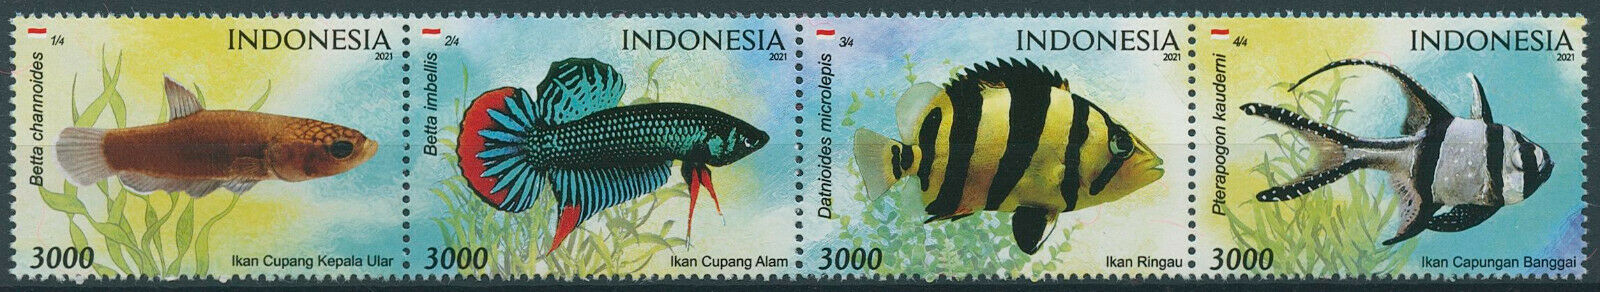 Indonesia 2021 MNH Fish Stamps Endemic Decorative Fishes Betta 4v Strip